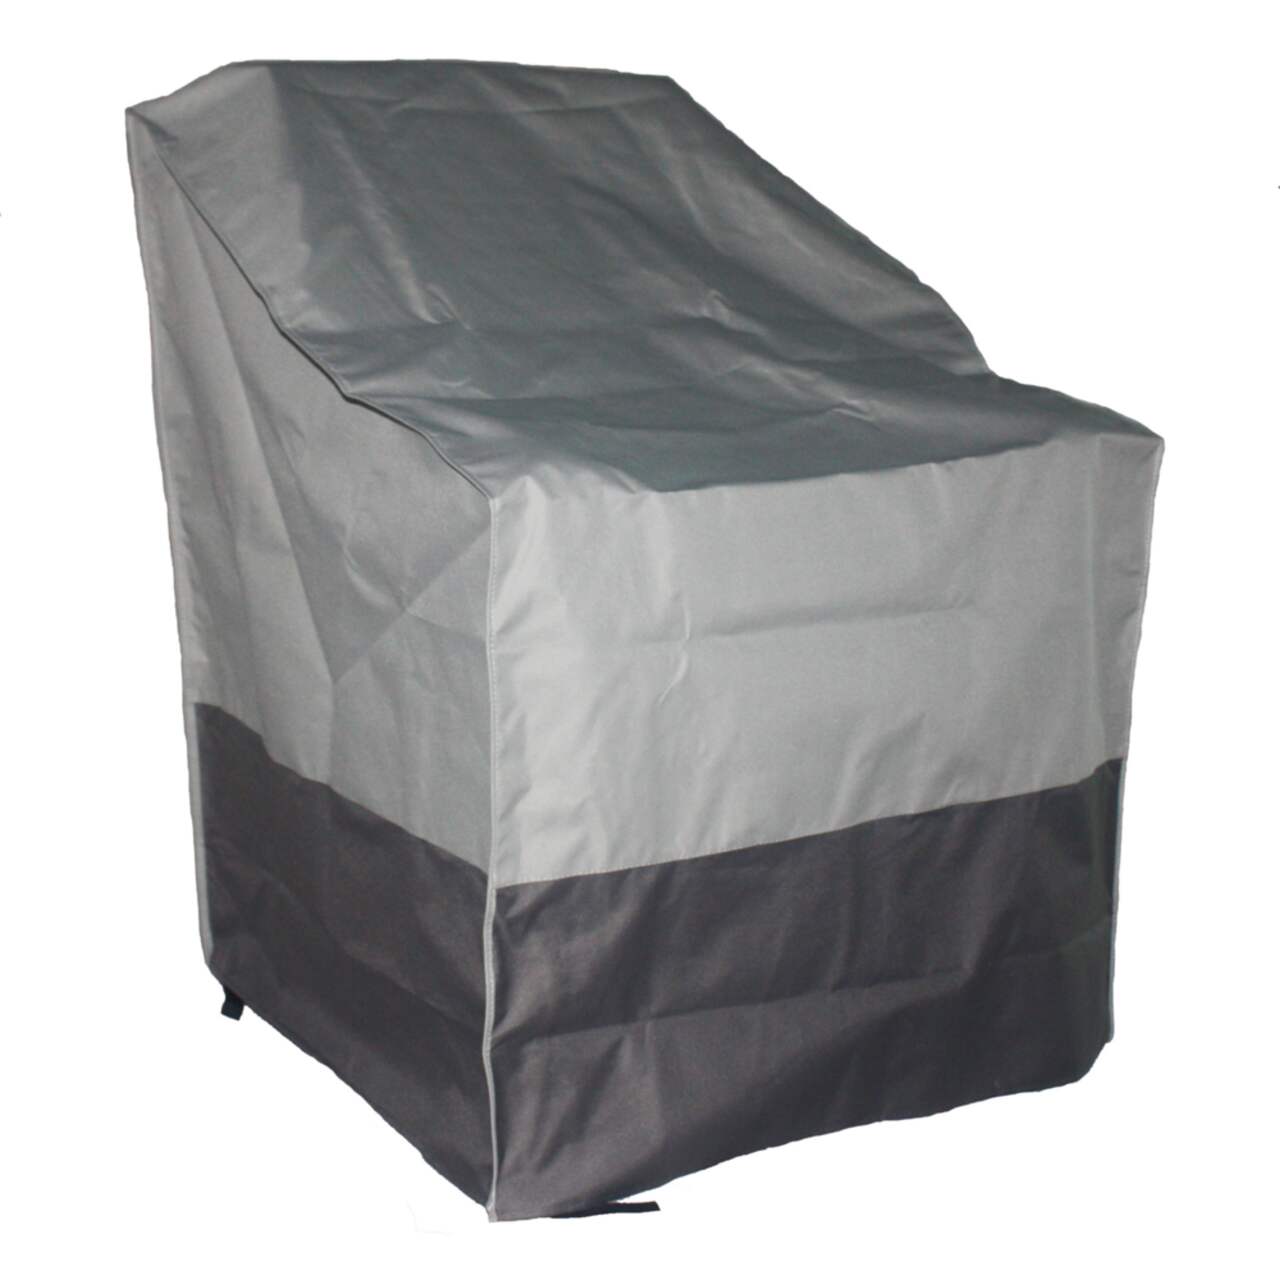 https://media-www.canadiantire.ca/product/seasonal-gardening/backyard-living/outdoor-furniture/0881881/tripel-stacking-chair-patio-cover-d190015d-2406-4fe8-b629-019941c5b3bd.png?imdensity=1&imwidth=640&impolicy=mZoom